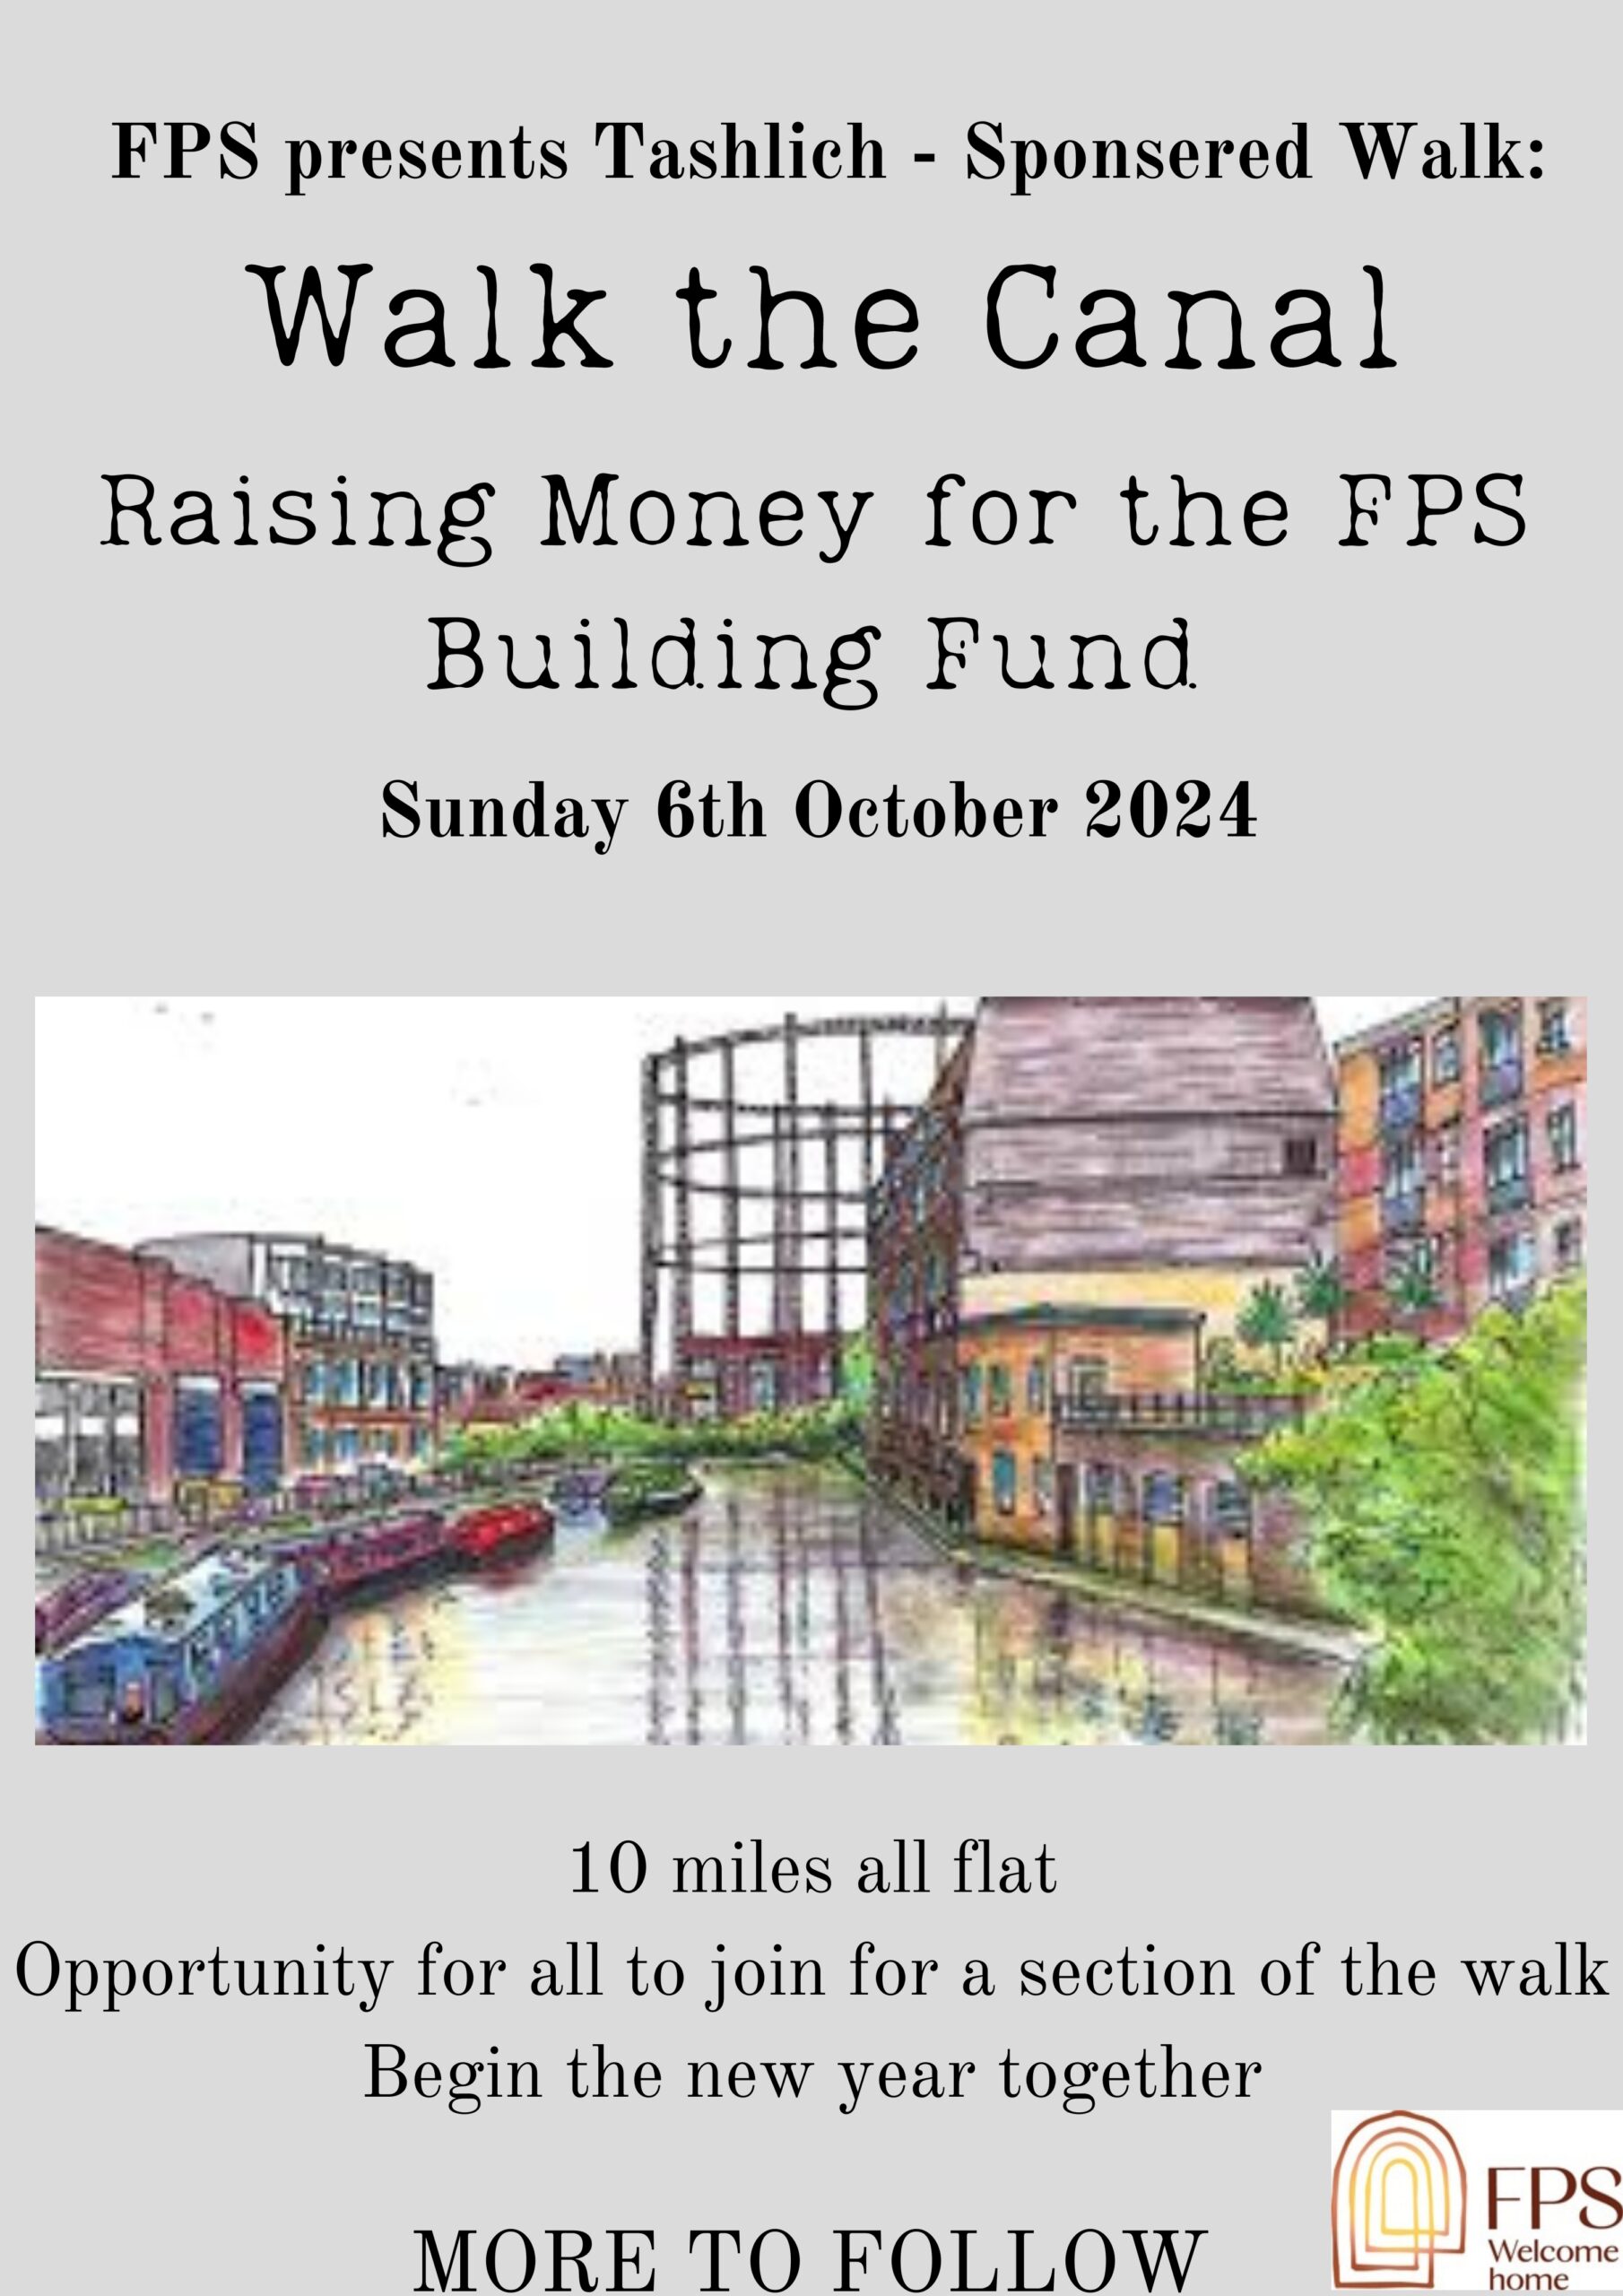 Walk the Canal: Raising Money for the FPS Building Fund